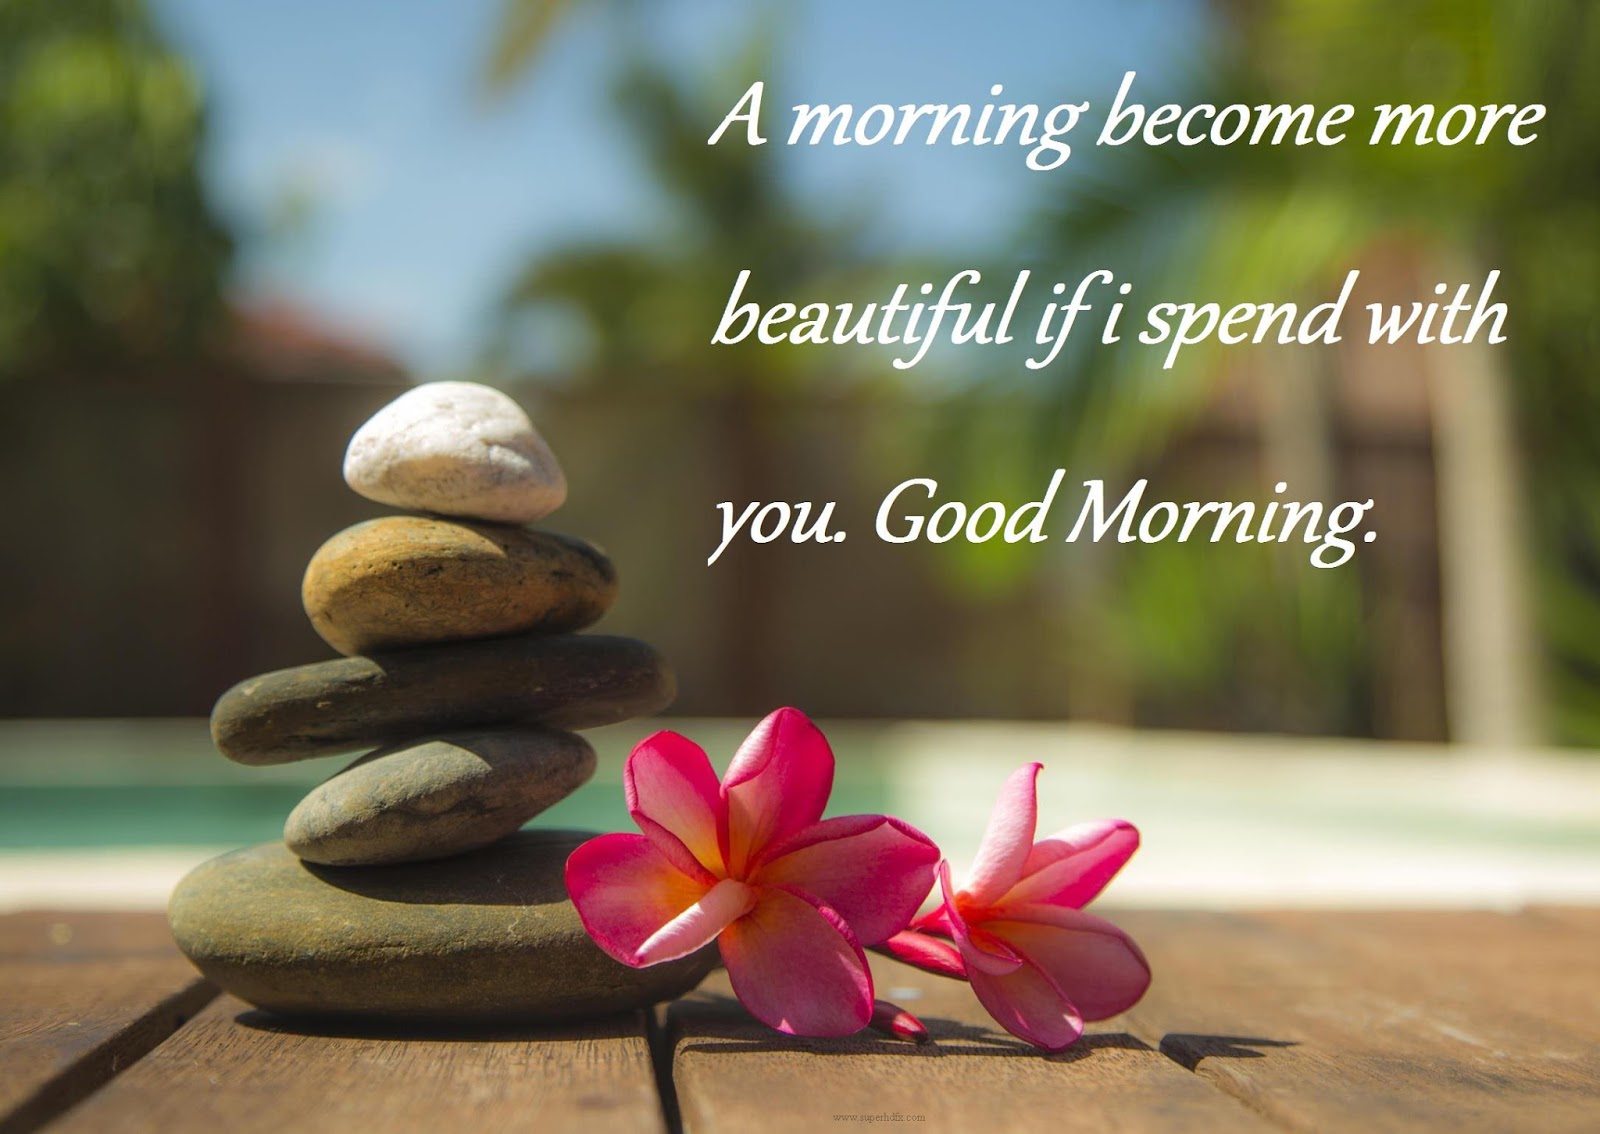 Image for Whatsapp - Image for Apps: Good Morning Wishes with Fun and Masti